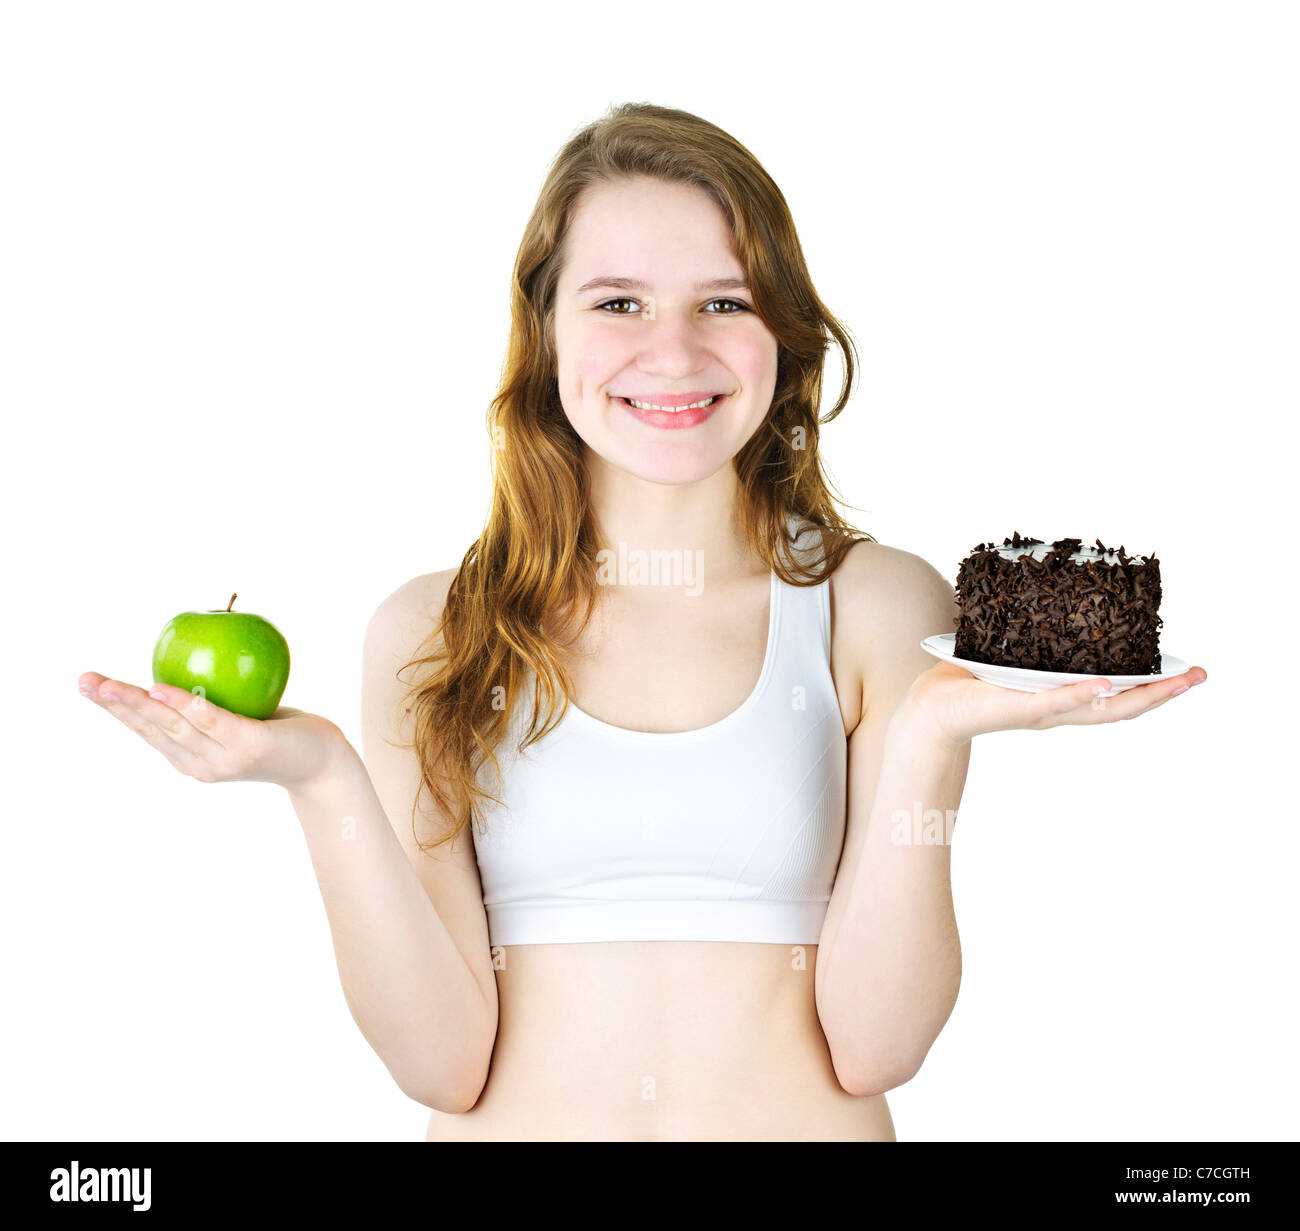 Smiling young woman holding apple and chocolate cake Stock Photo